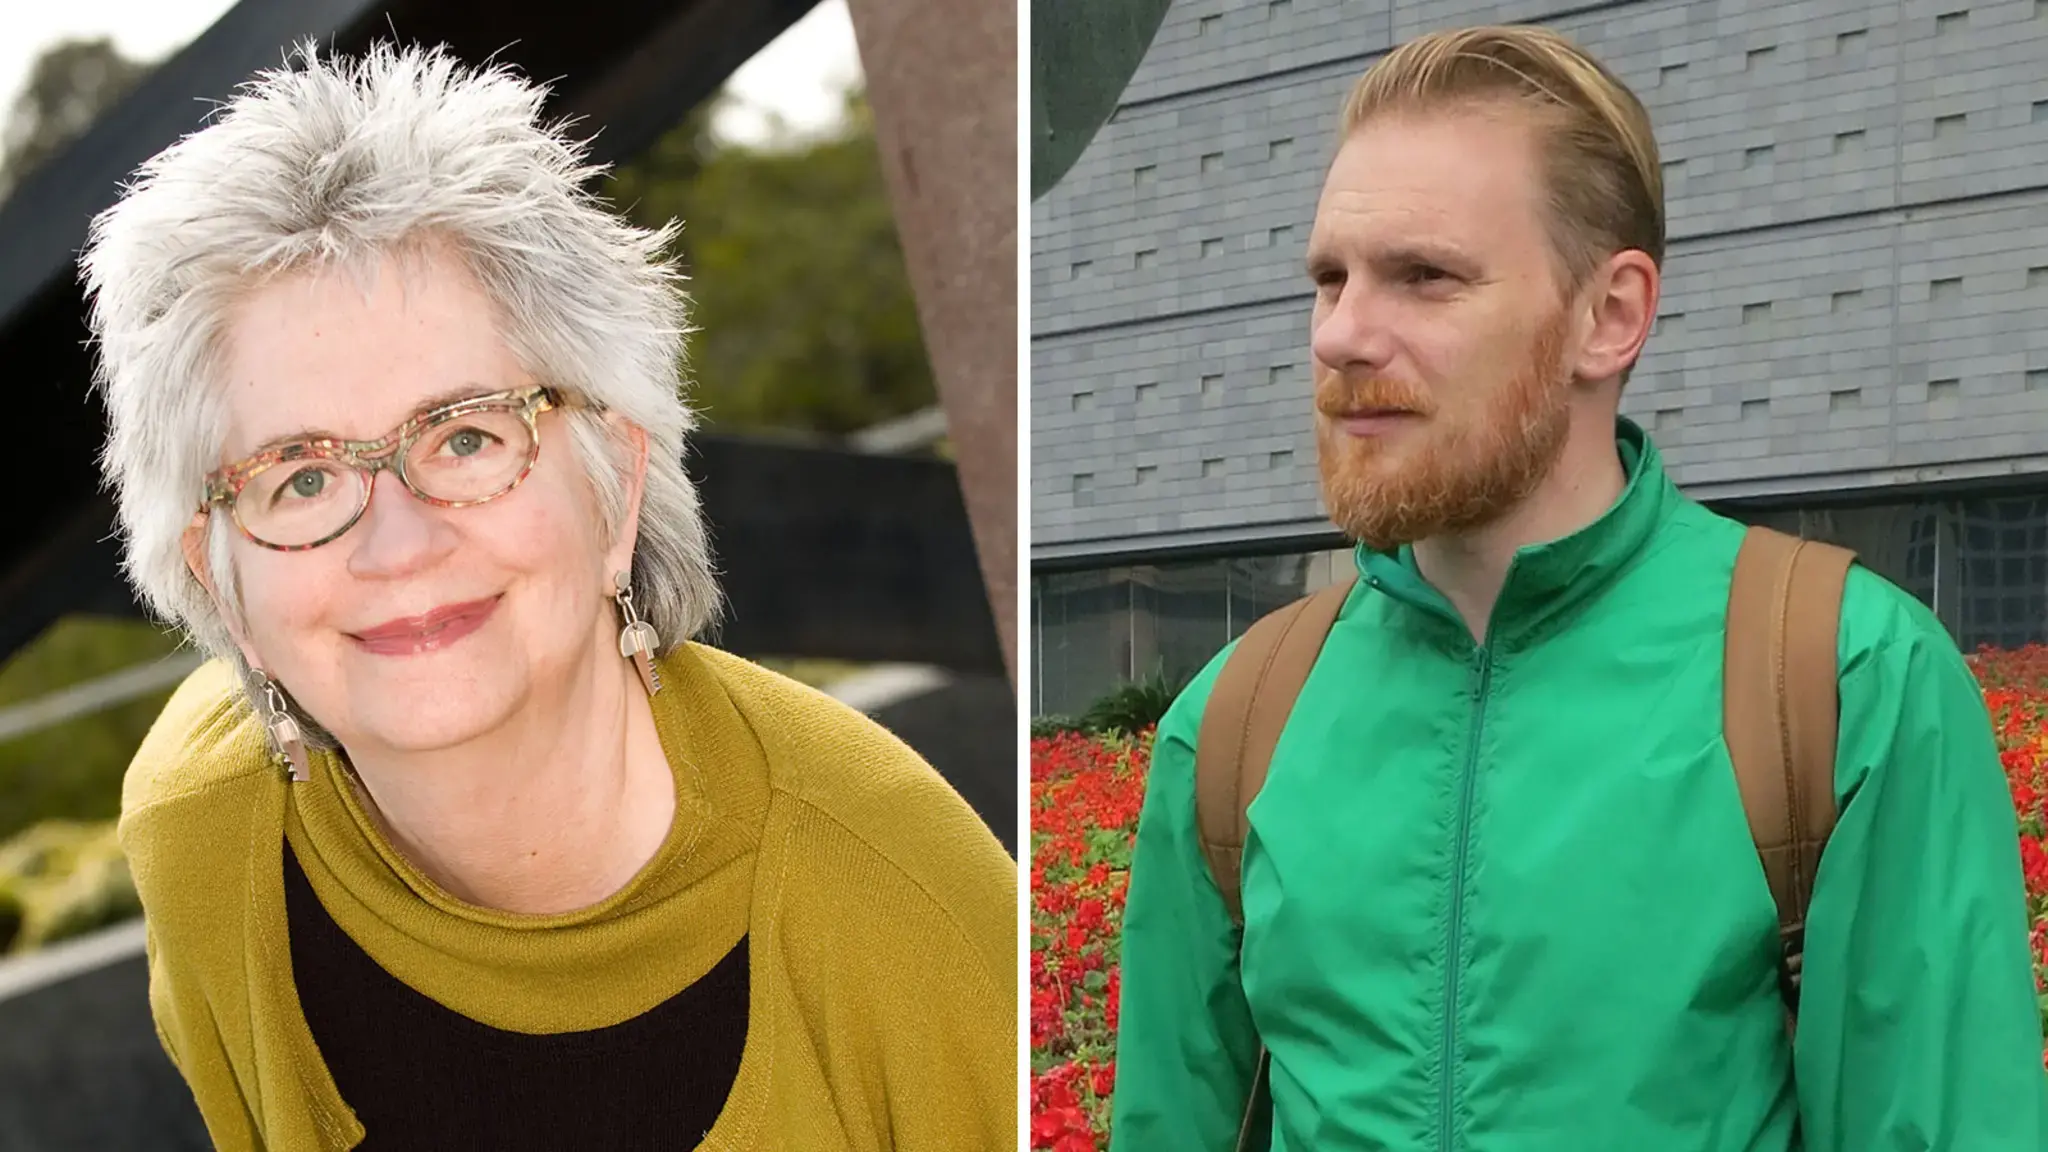 Left: Kathleen McLean. Image courtesy of Discursive Space. Right: Mark Beasley.